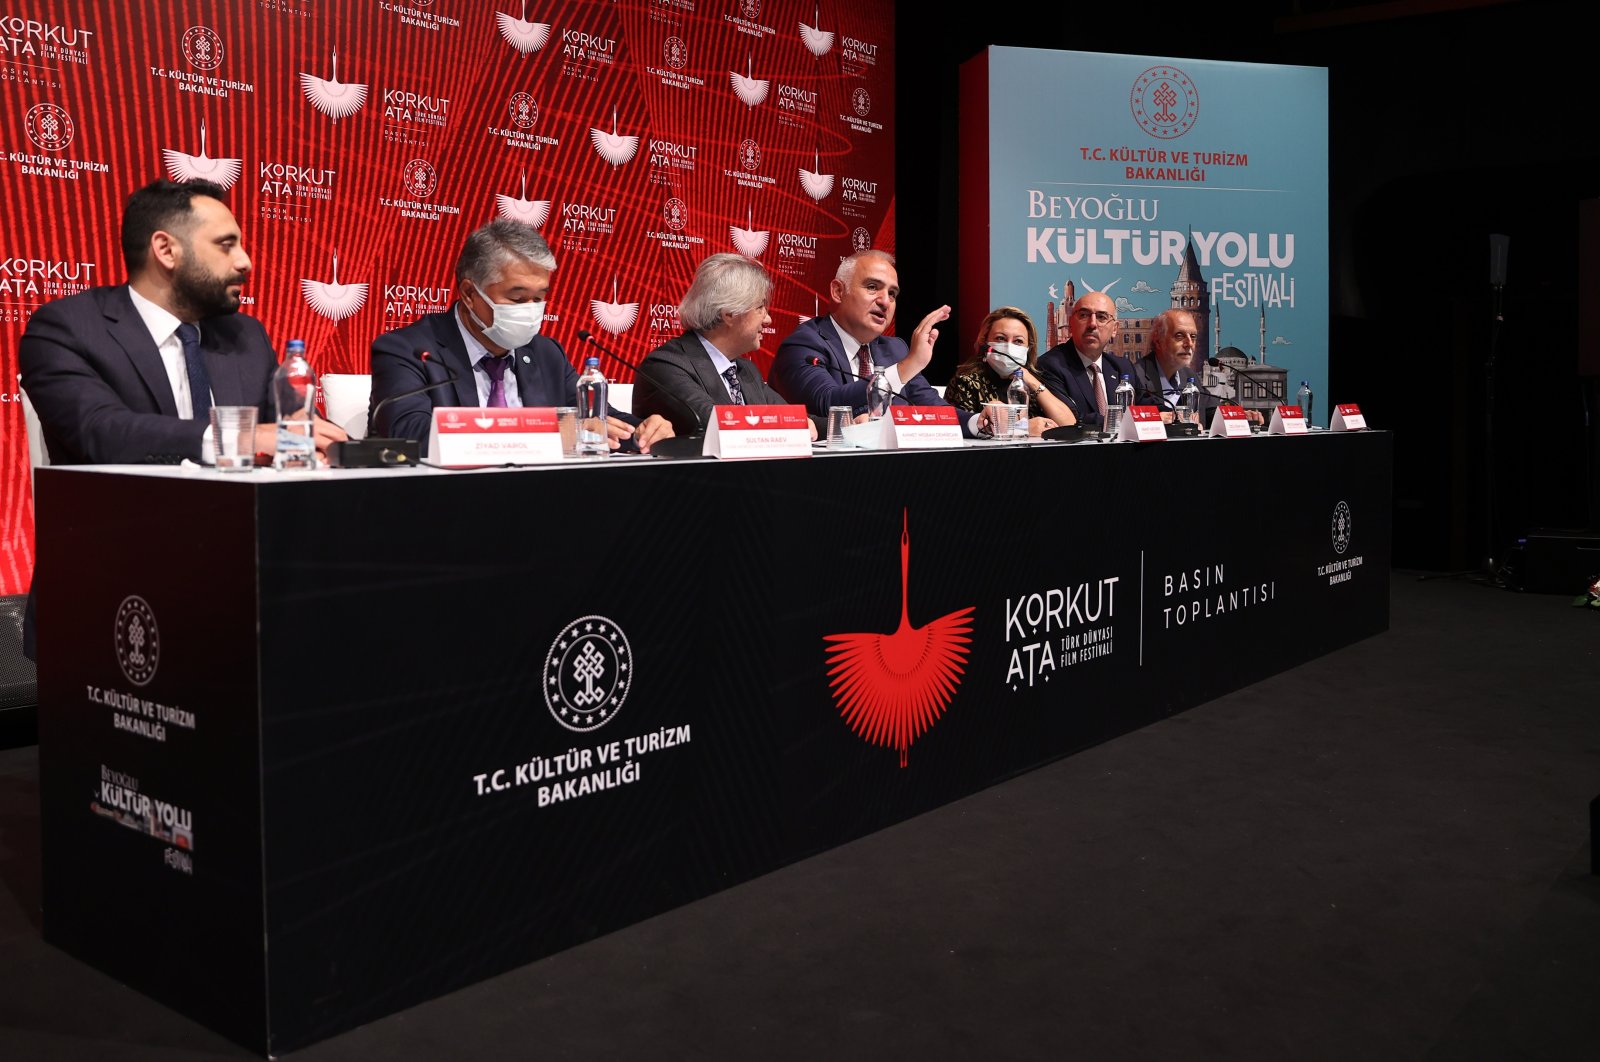 Minister of Culture and Tourism Mehmet Nuri Ersoy (C) speaks at the meeting of the festival at Atlas Cinema, Istanbul, Turkey, Nov. 3, 2021. (AA Photo)